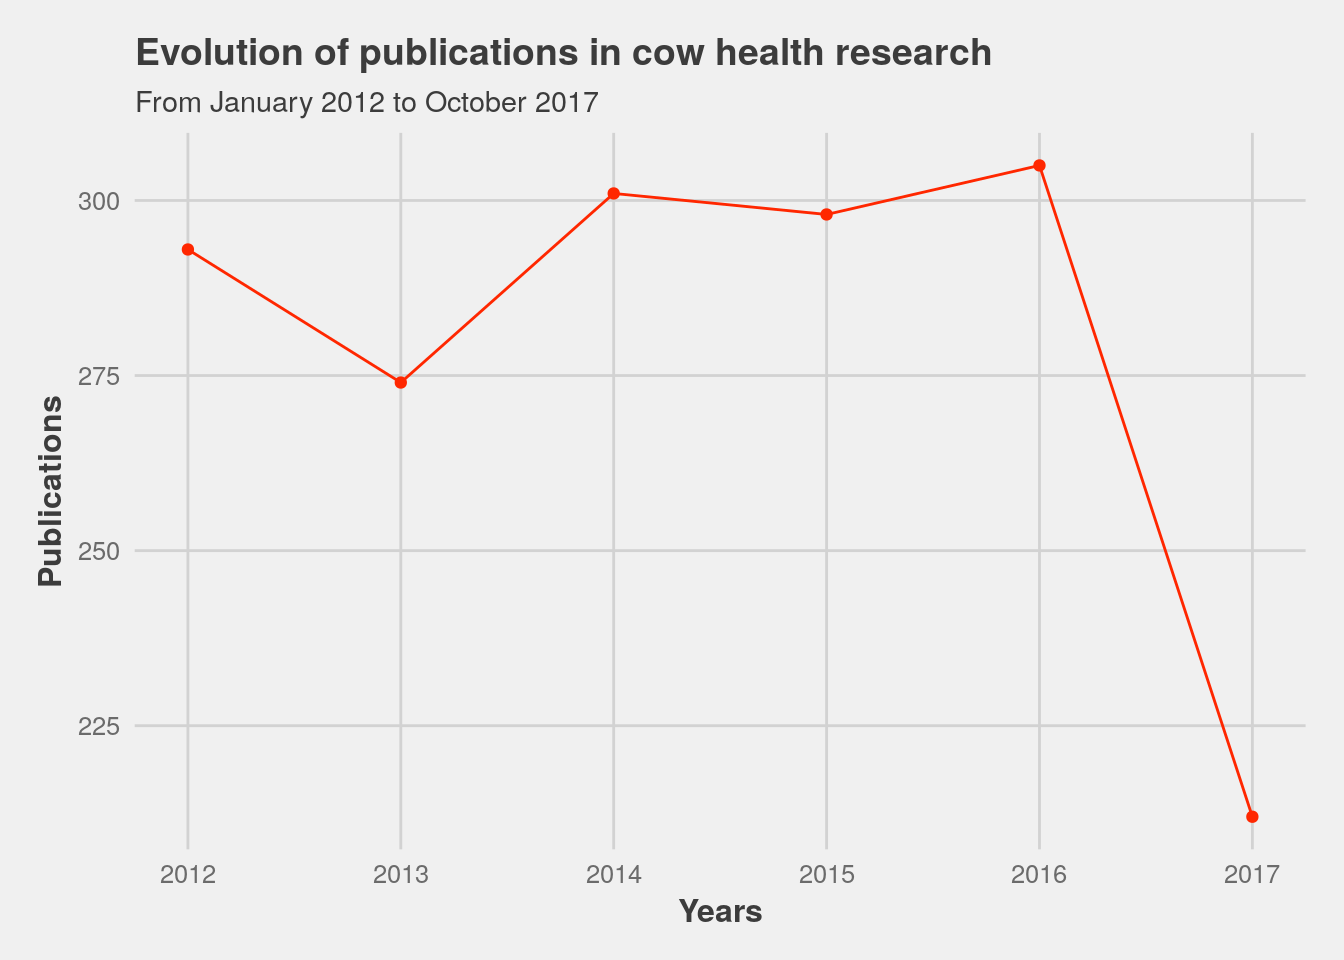 Evolution of publications in cattle health research.